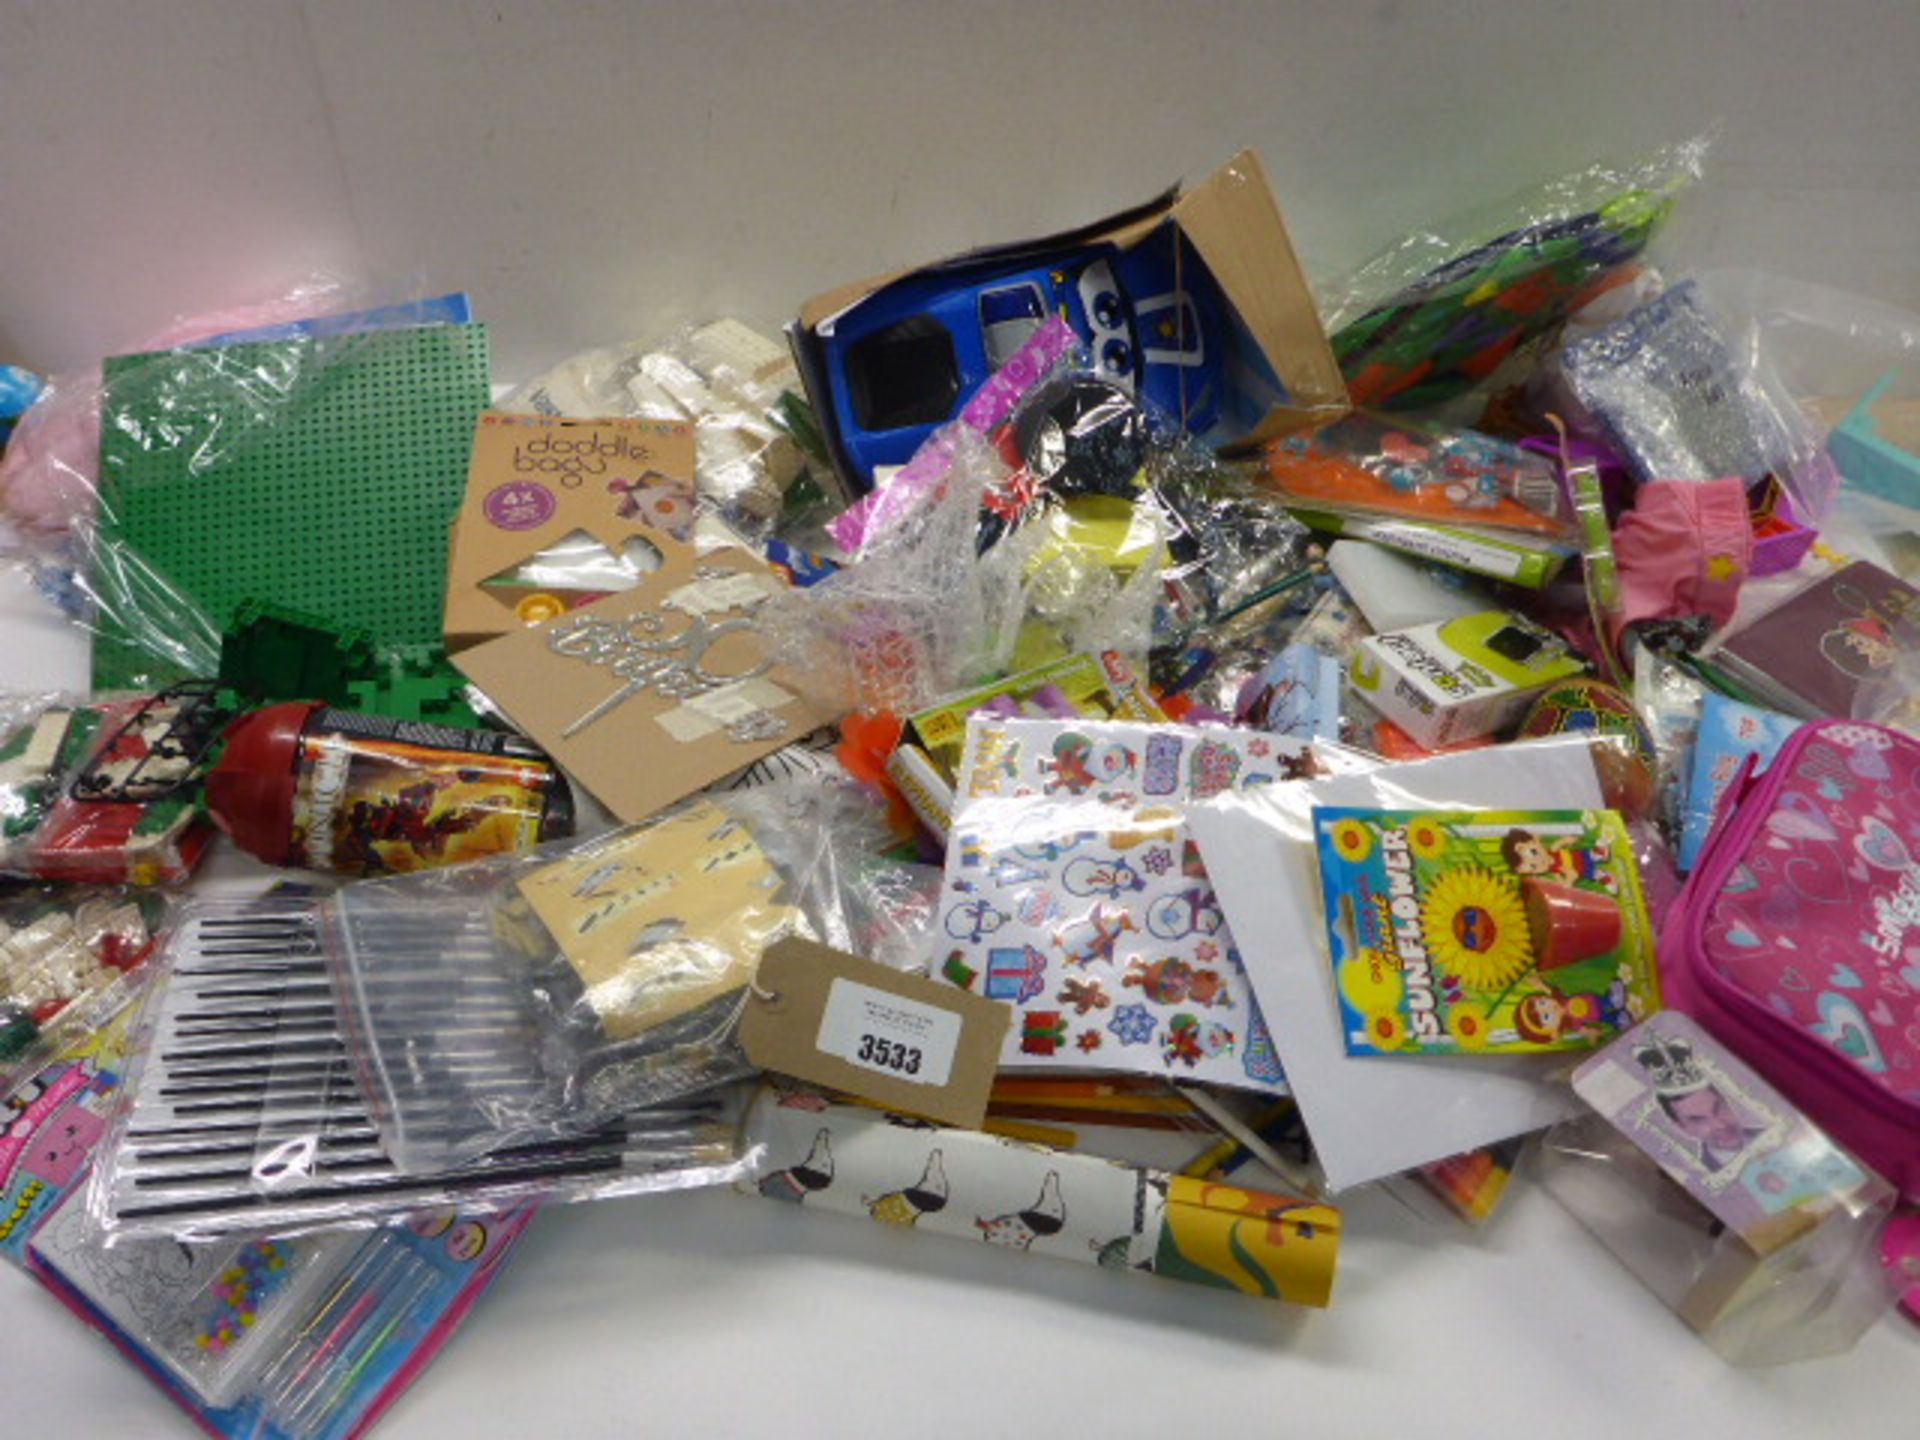 Large bag of novelty toys, Nerf bullets, activity magazine, building blocks, stickers, posters,